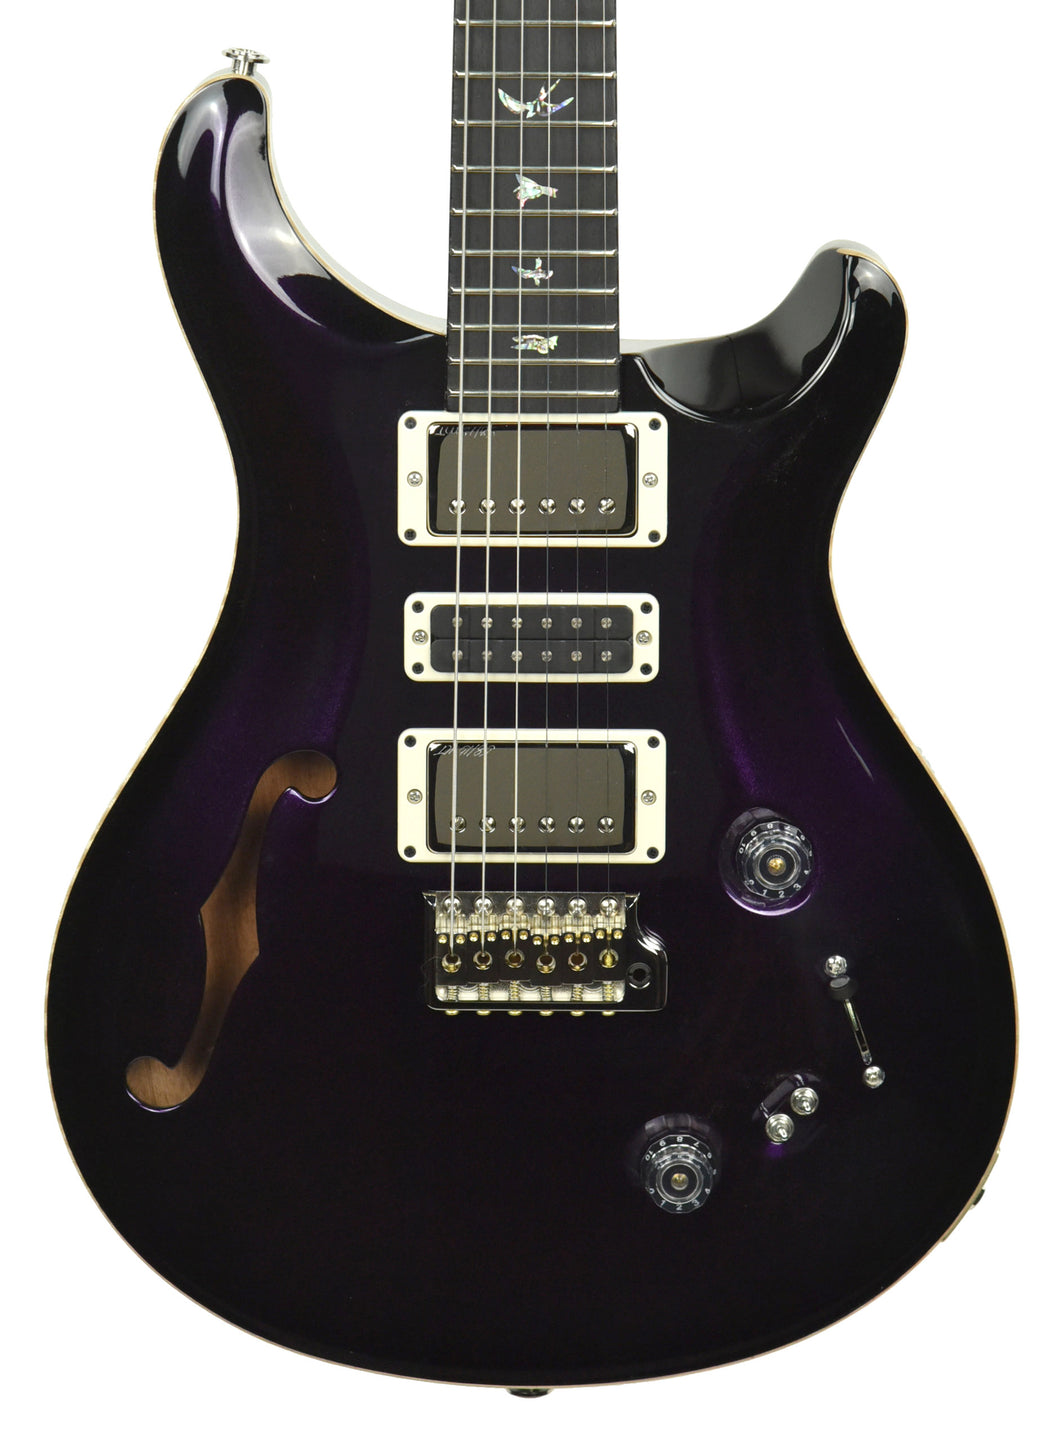 PRS Special 22 Semi Hollow in Deep Grape Metallic 200305216 - The Music Gallery